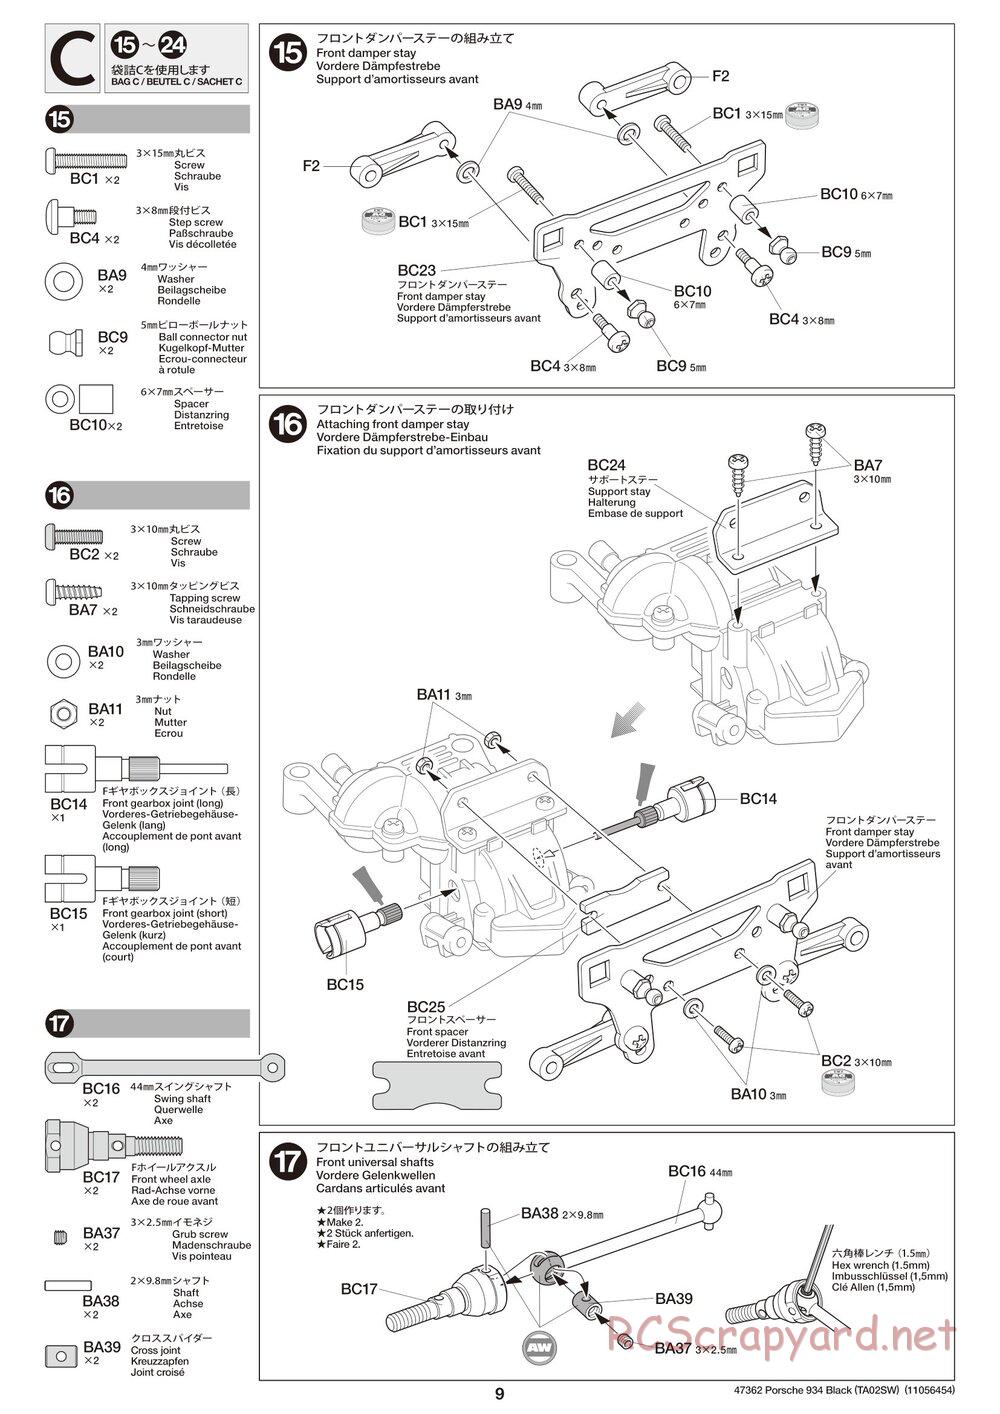 Tamiya - TT-02 White Special Chassis - Manual - Page 9